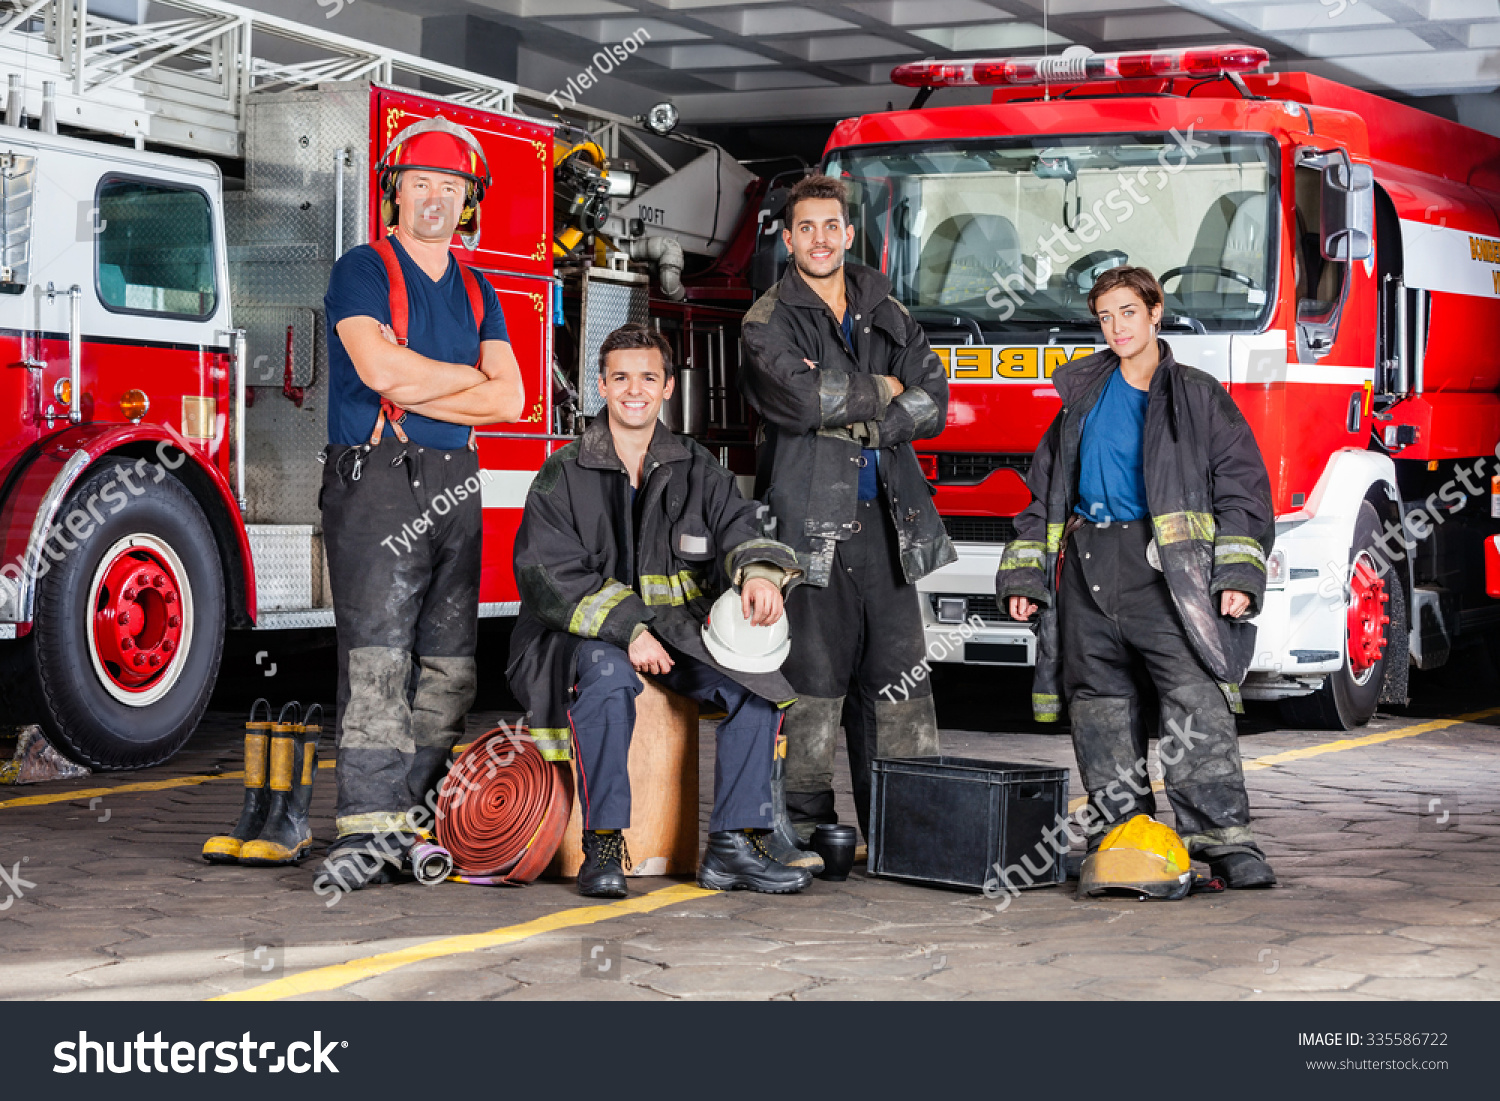 Portrait of confident firefighters with equipment against trucks at fire station #335586722